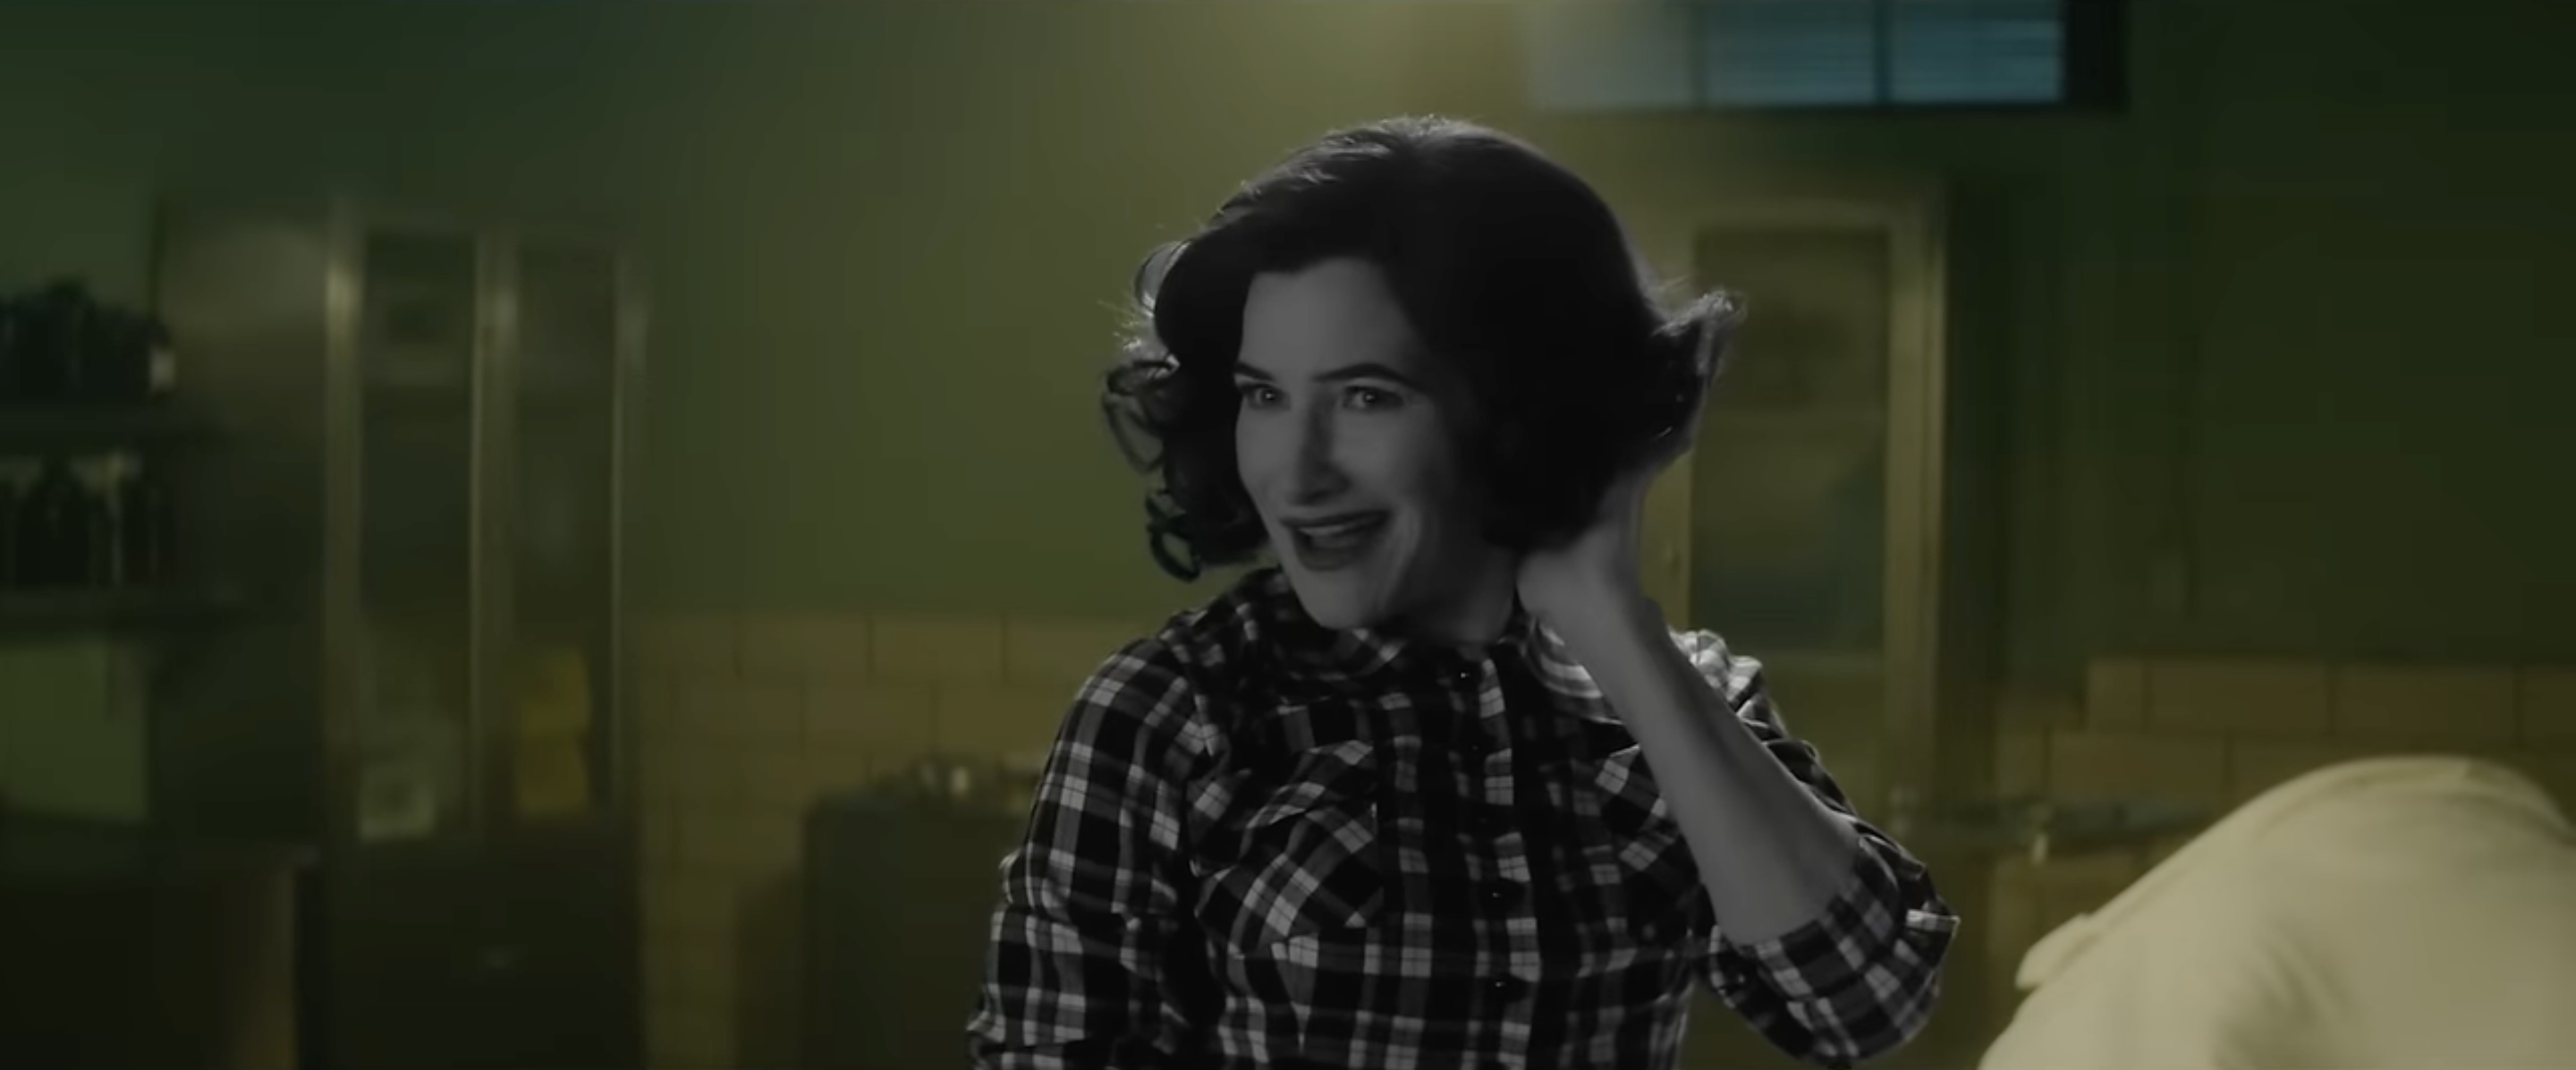 Kathryn Hahn as Agatha/Agnes in Agatha All Along. She smiles and preens her hair, standing in a green tiled room. She, however, appears entirely in black and white, like an old sitcom.